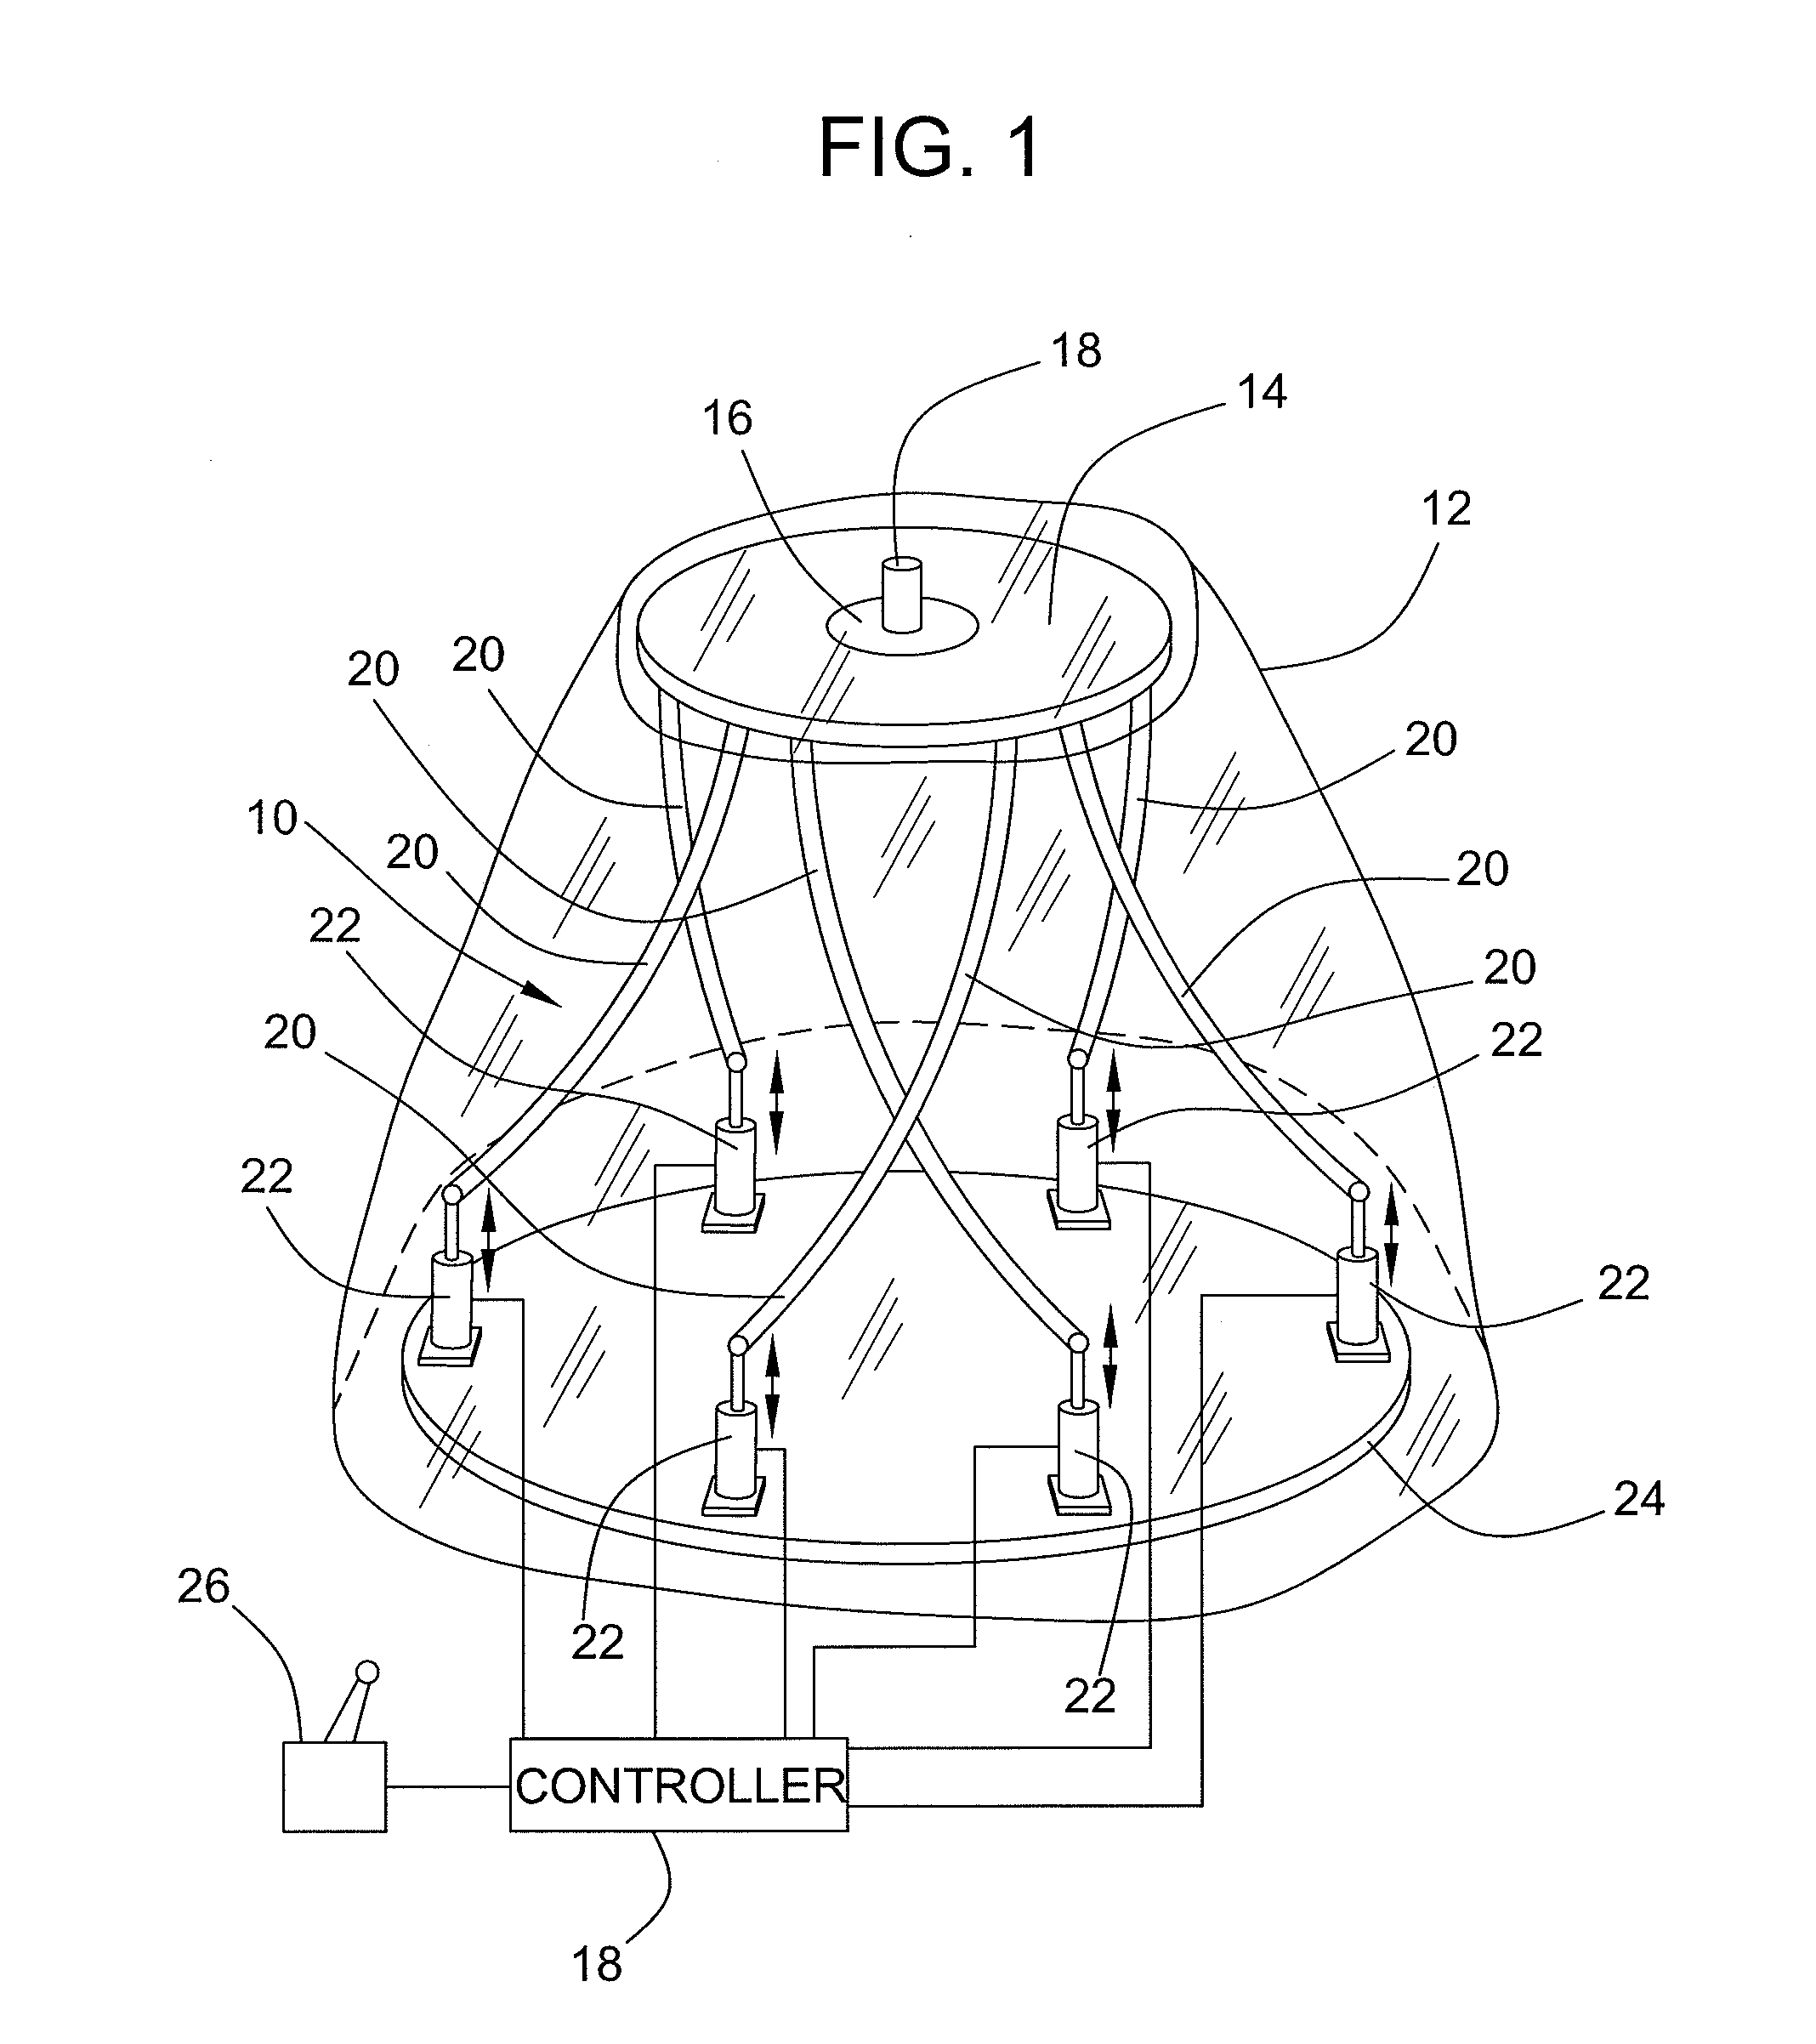 Surgical system with medical manipulator and sterile barrier